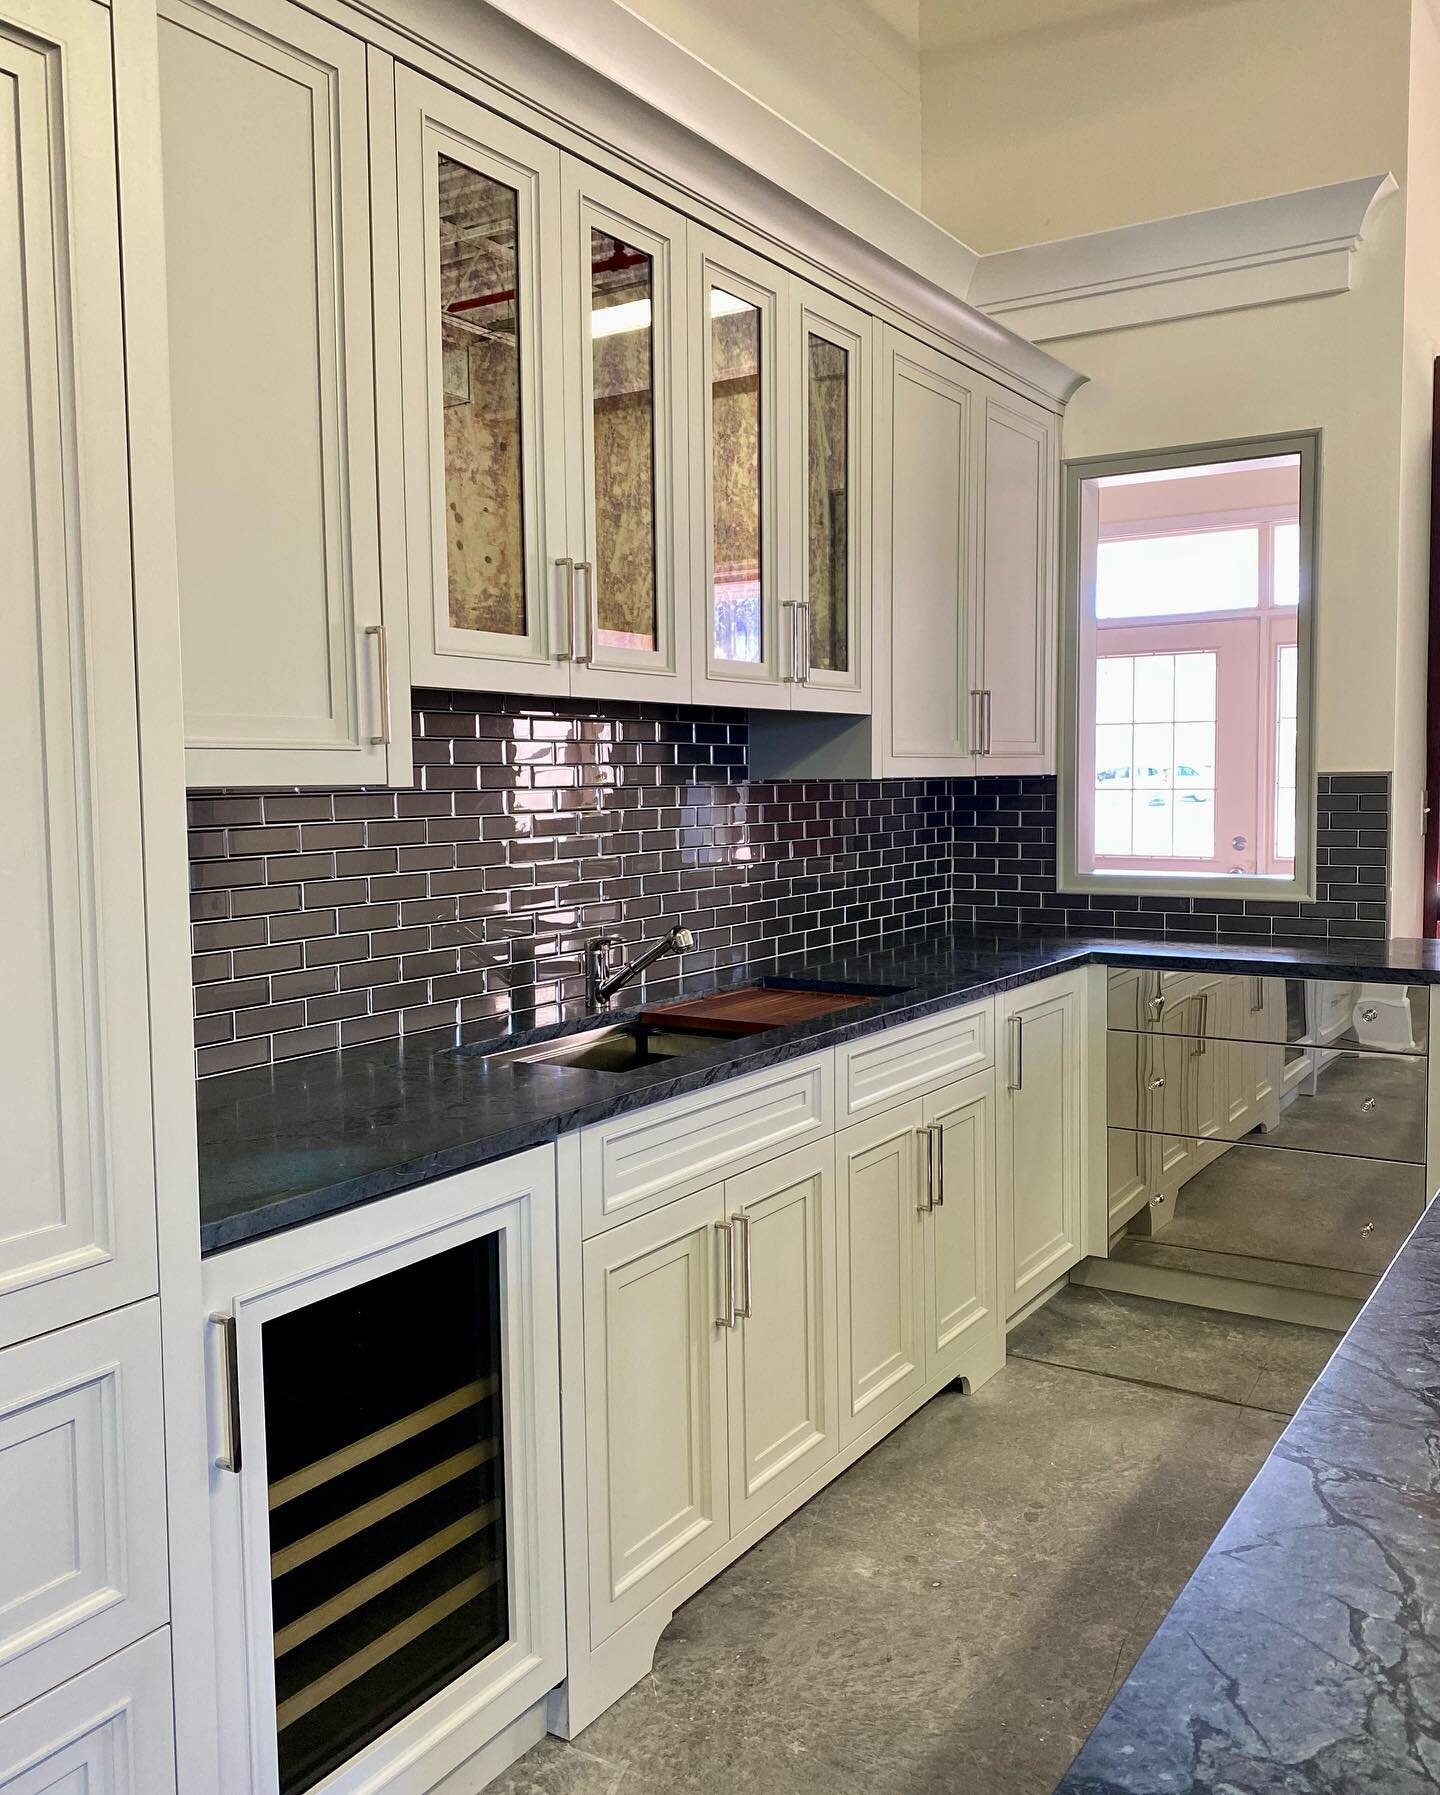 Mirror mirror on the wall. Who&rsquo;s the prettiest kitchen of them all? Antique mirrored cabinet doors and mirrored drawer fronts take this kitchen from standard to stunning. 
&bull;
&bull;
&bull;
&bull;
&bull;
&bull;
&bull;
&bull;
&bull;
&bull;
&b